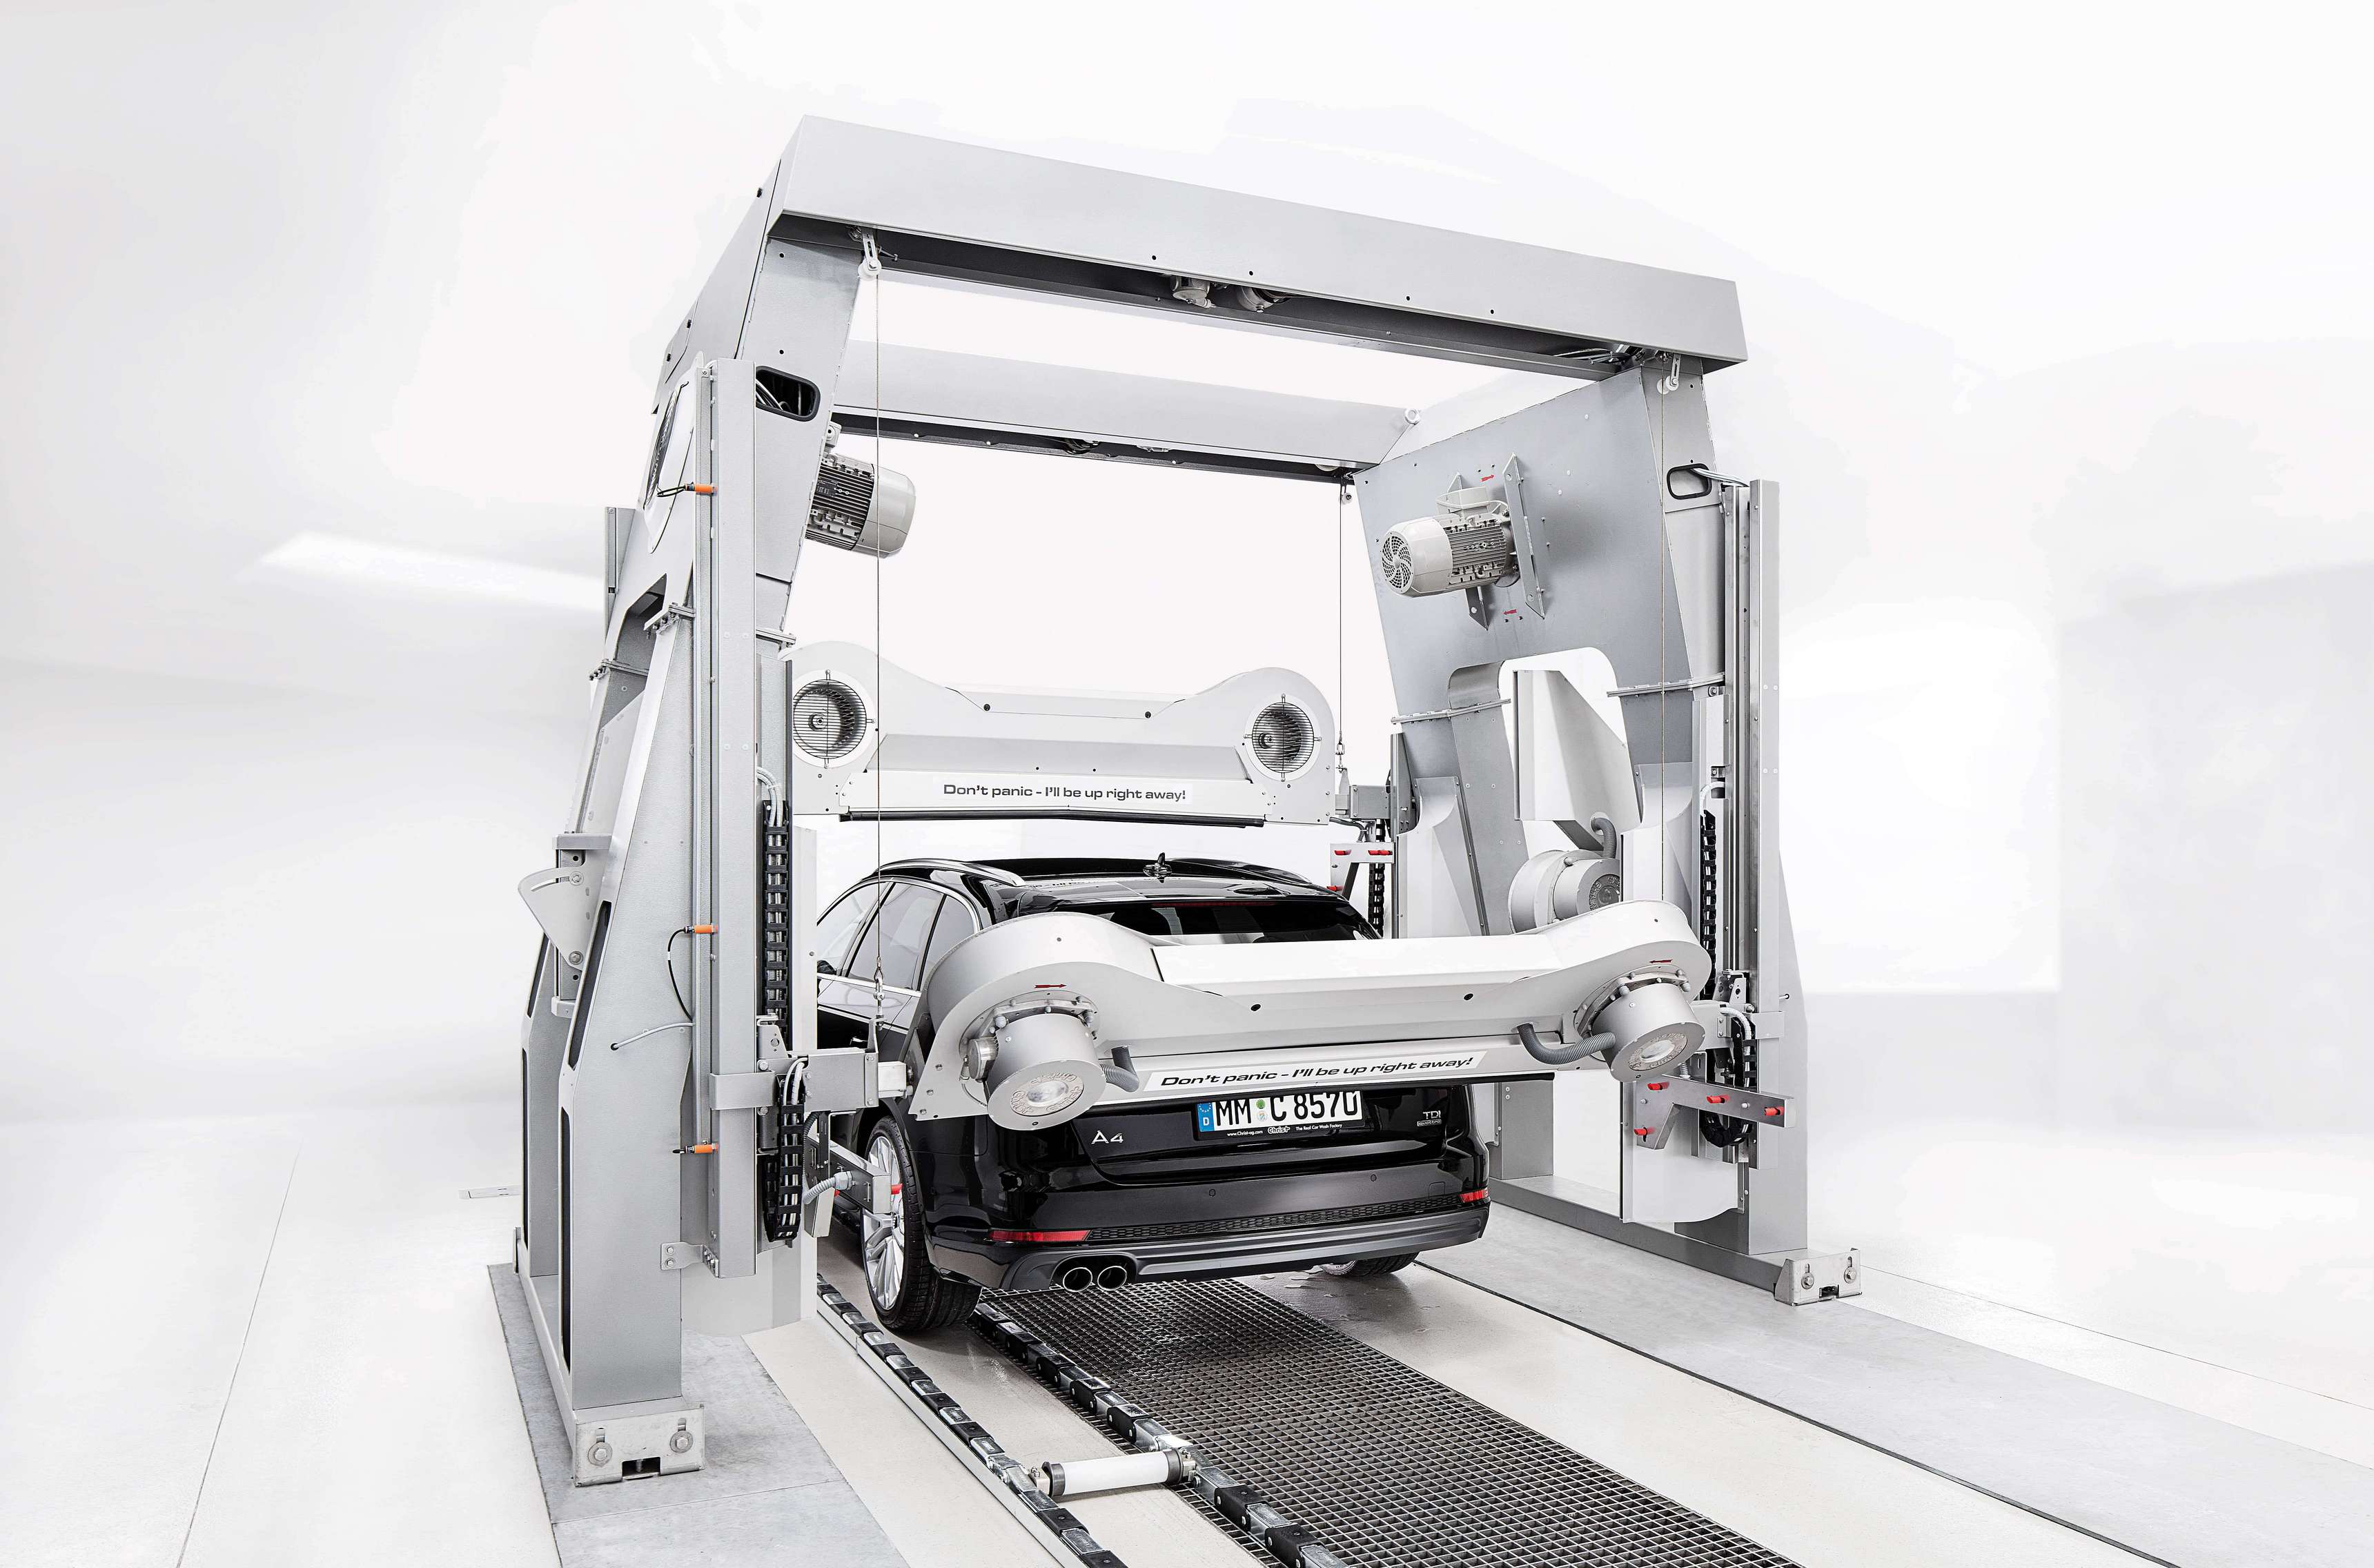 NANO FINISH can be used in the roll over wash unit and in the wash tunnel as well as in the self-service wash system